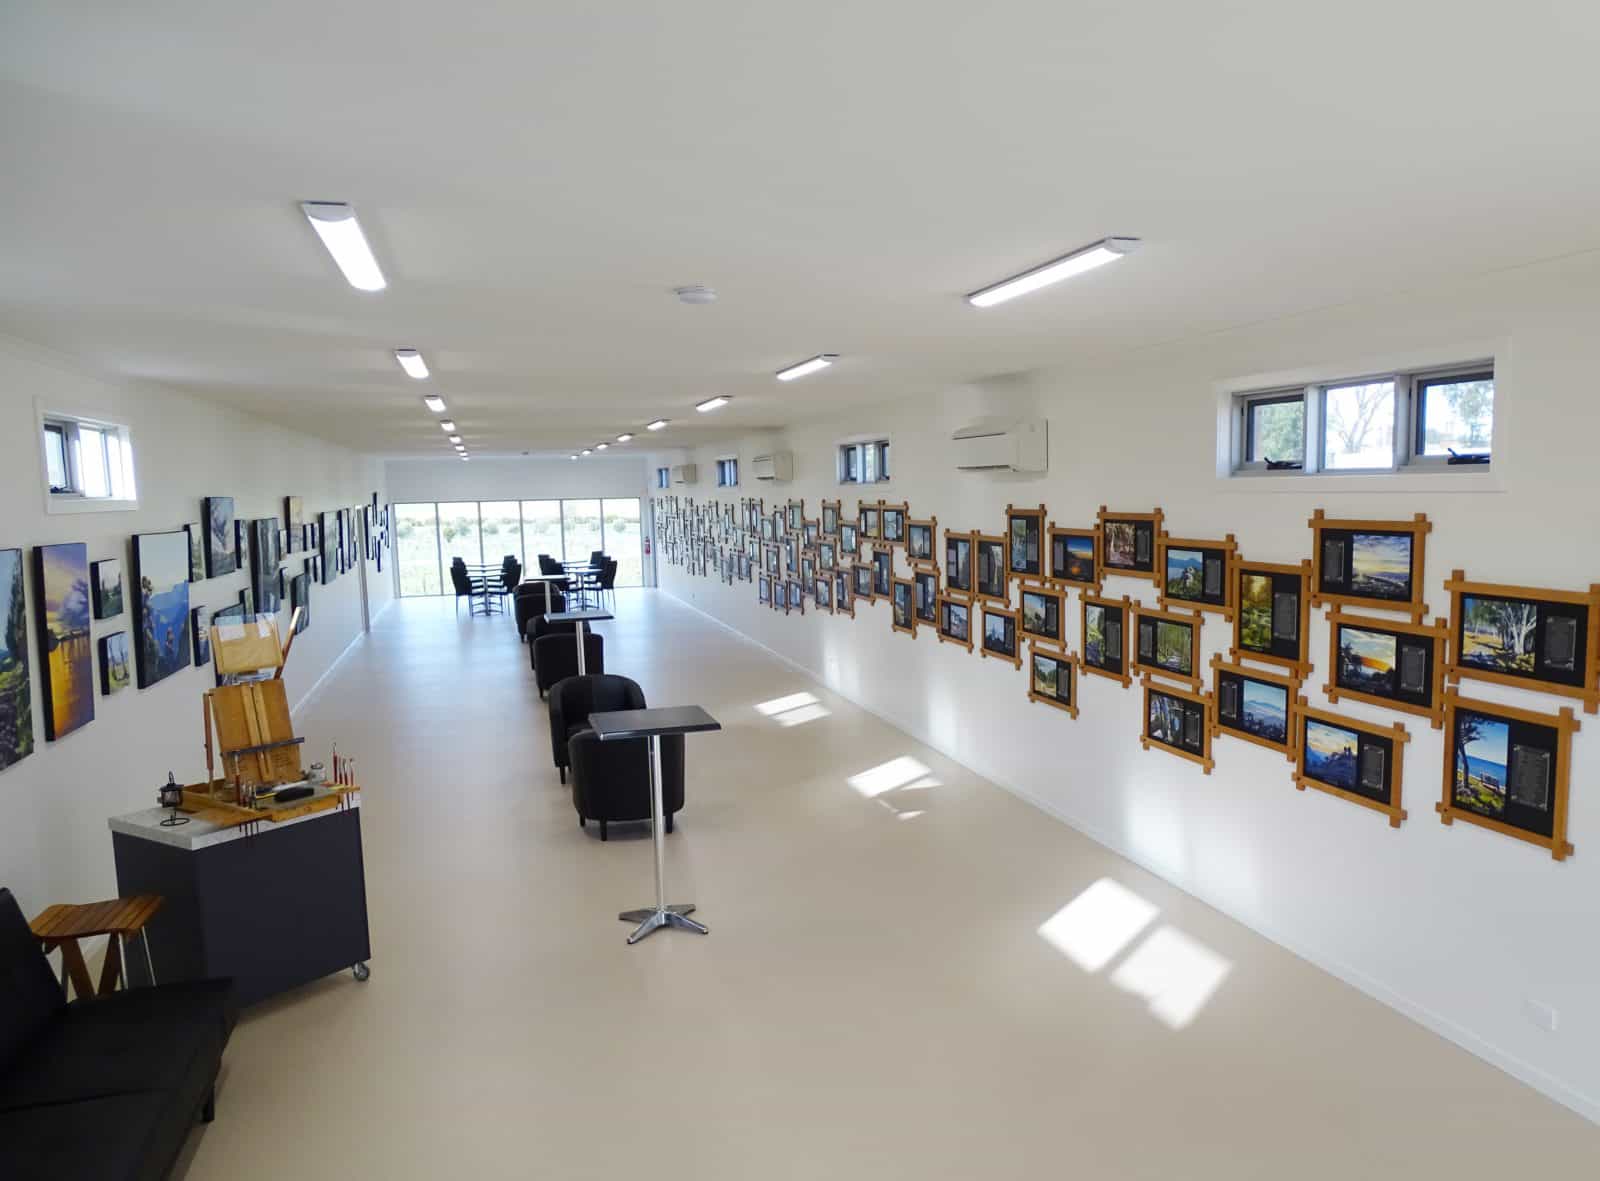 Gallery layout